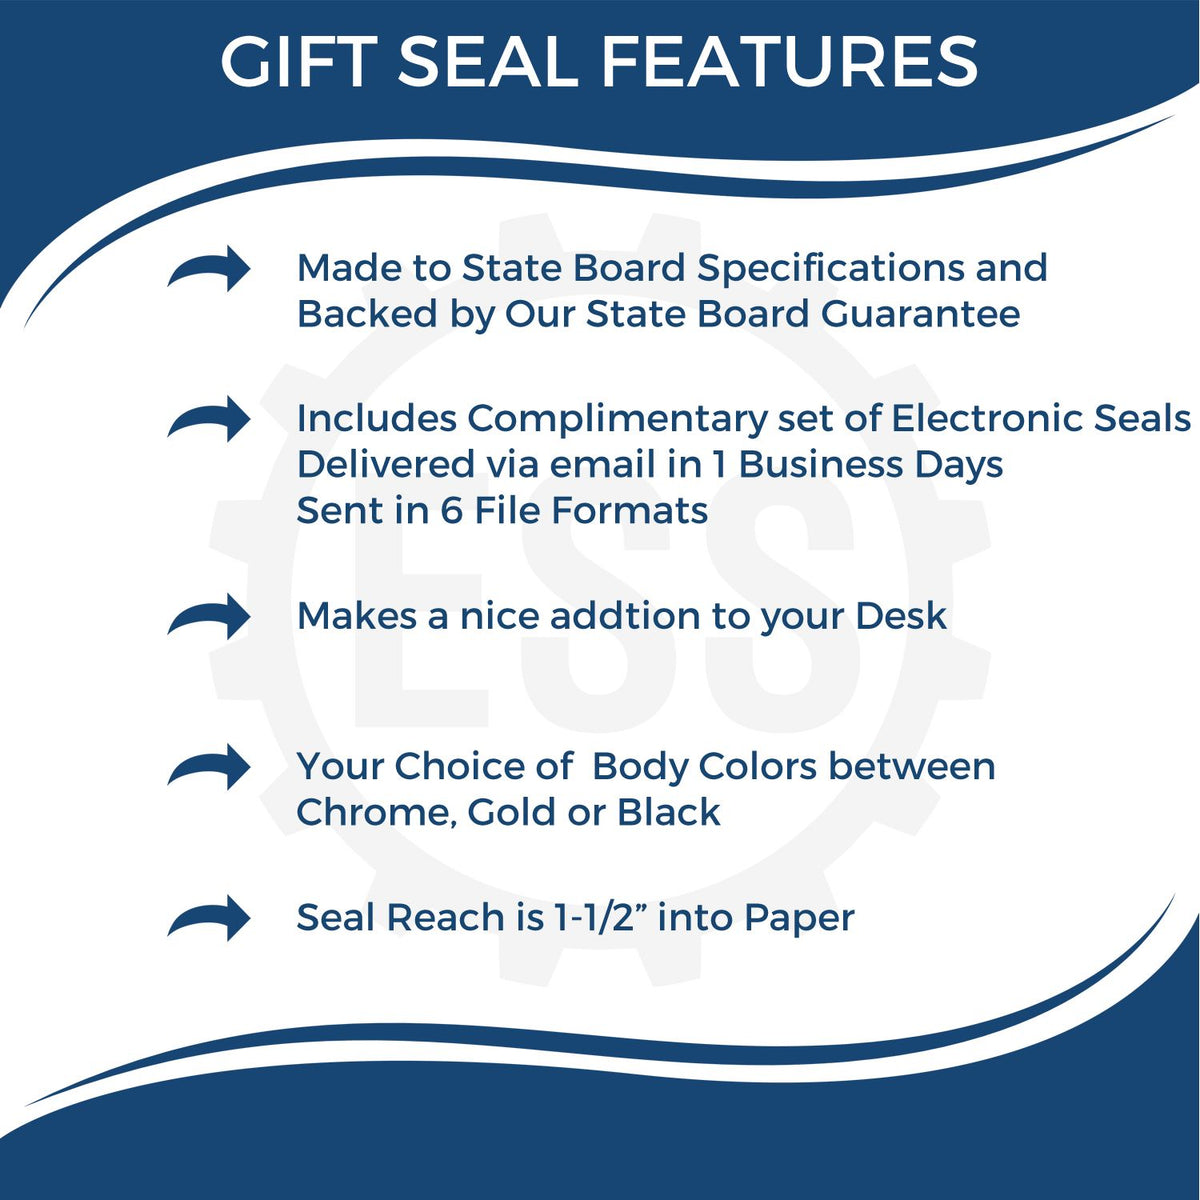 A picture of an infographic highlighting the selling points for the Gift Maine Engineer Seal